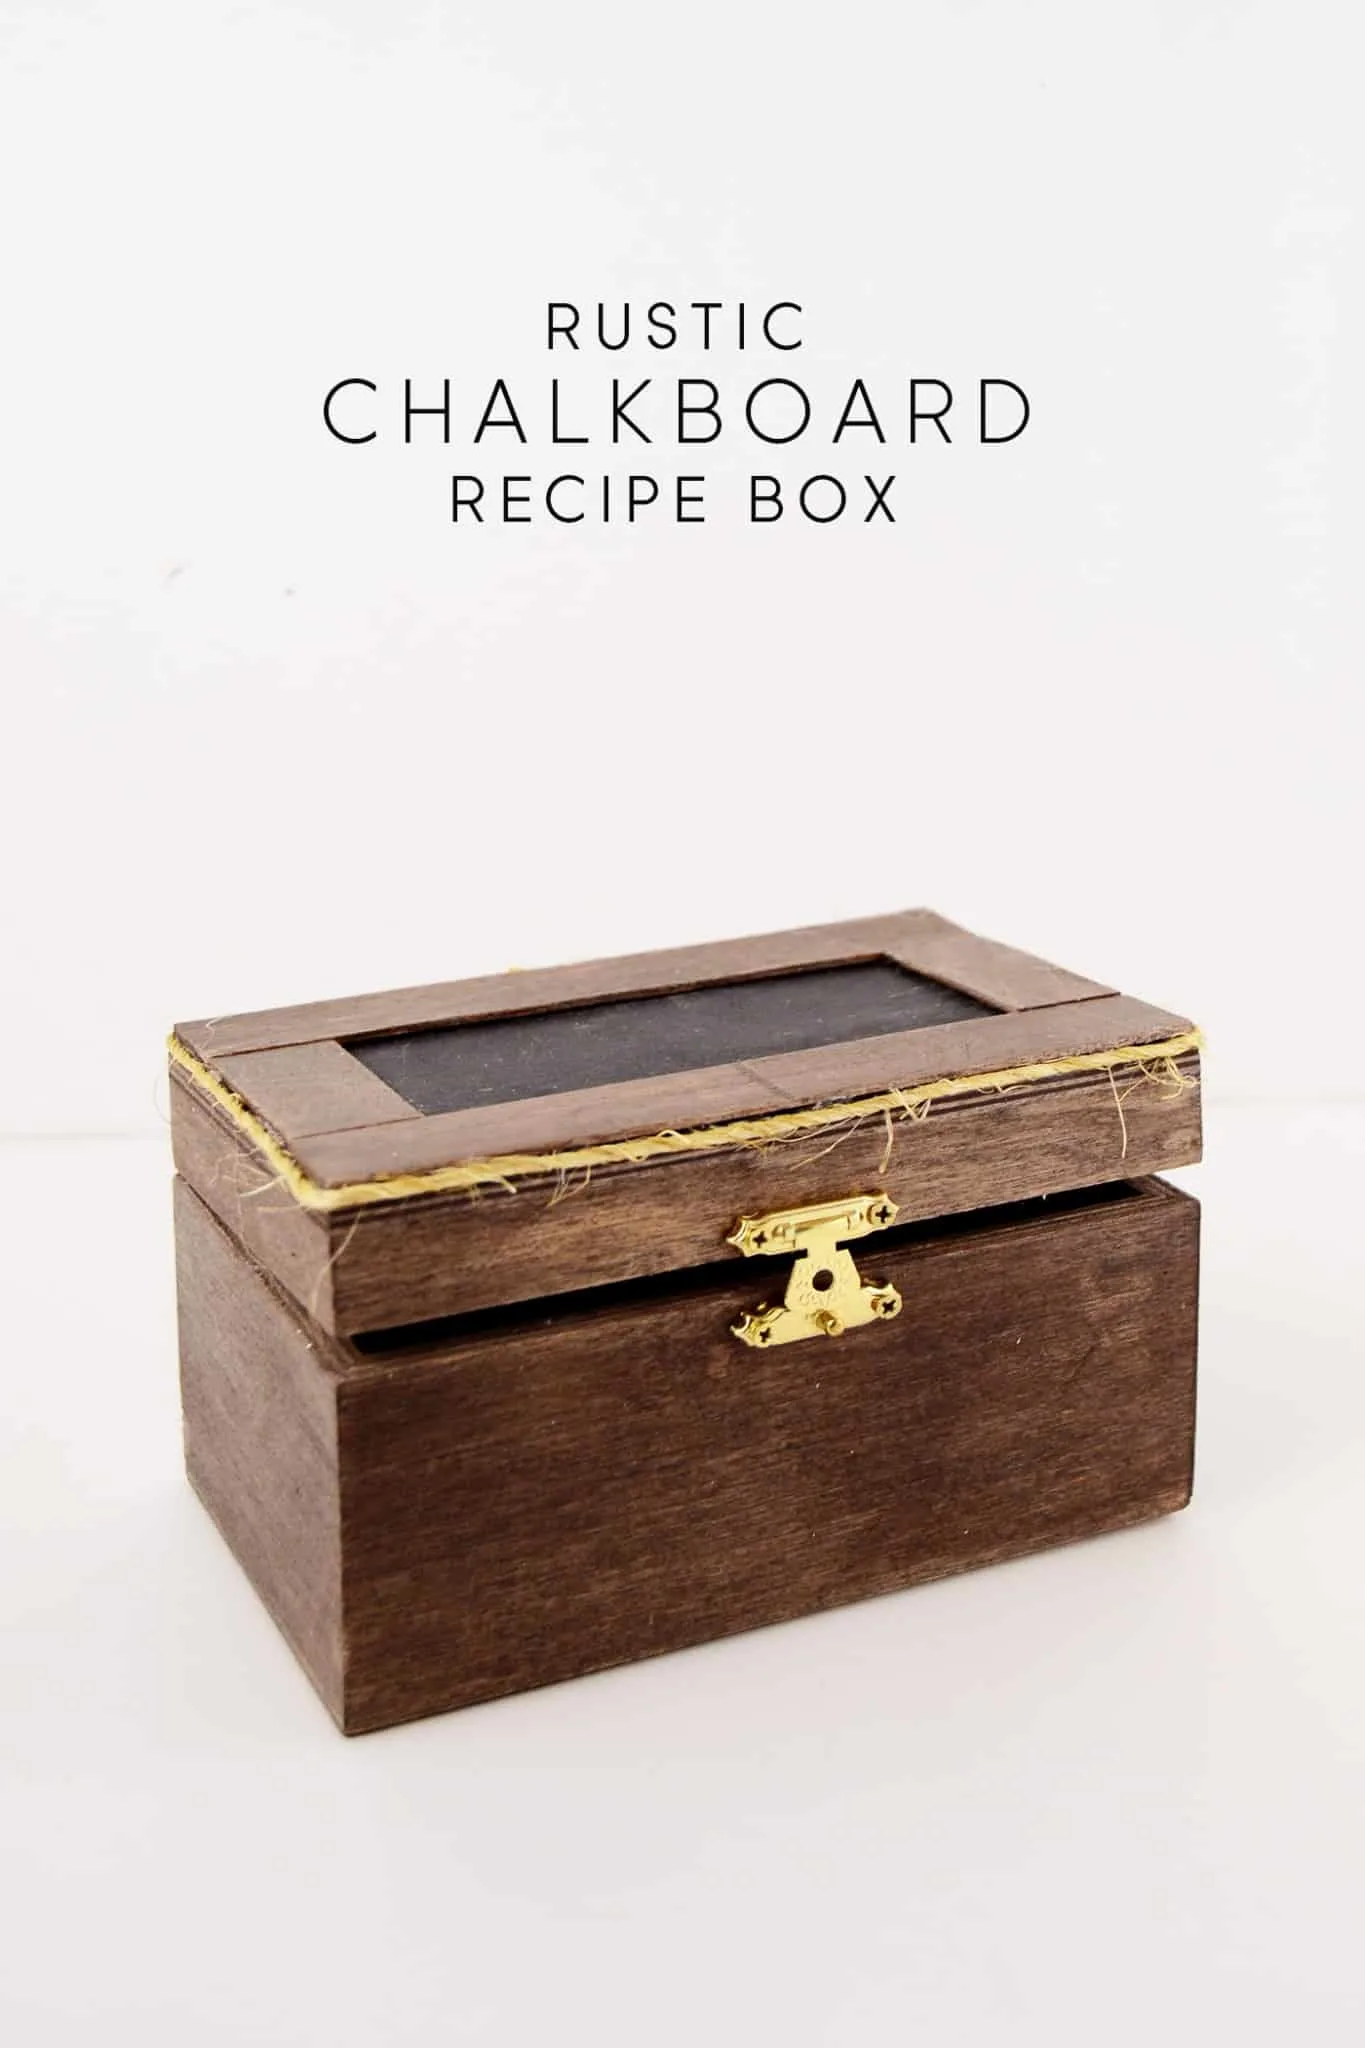 Store all of your treasured recipes in this unique, rustic themed DIY chalkboard recipe box! It's easy to make and perfect for gifting.